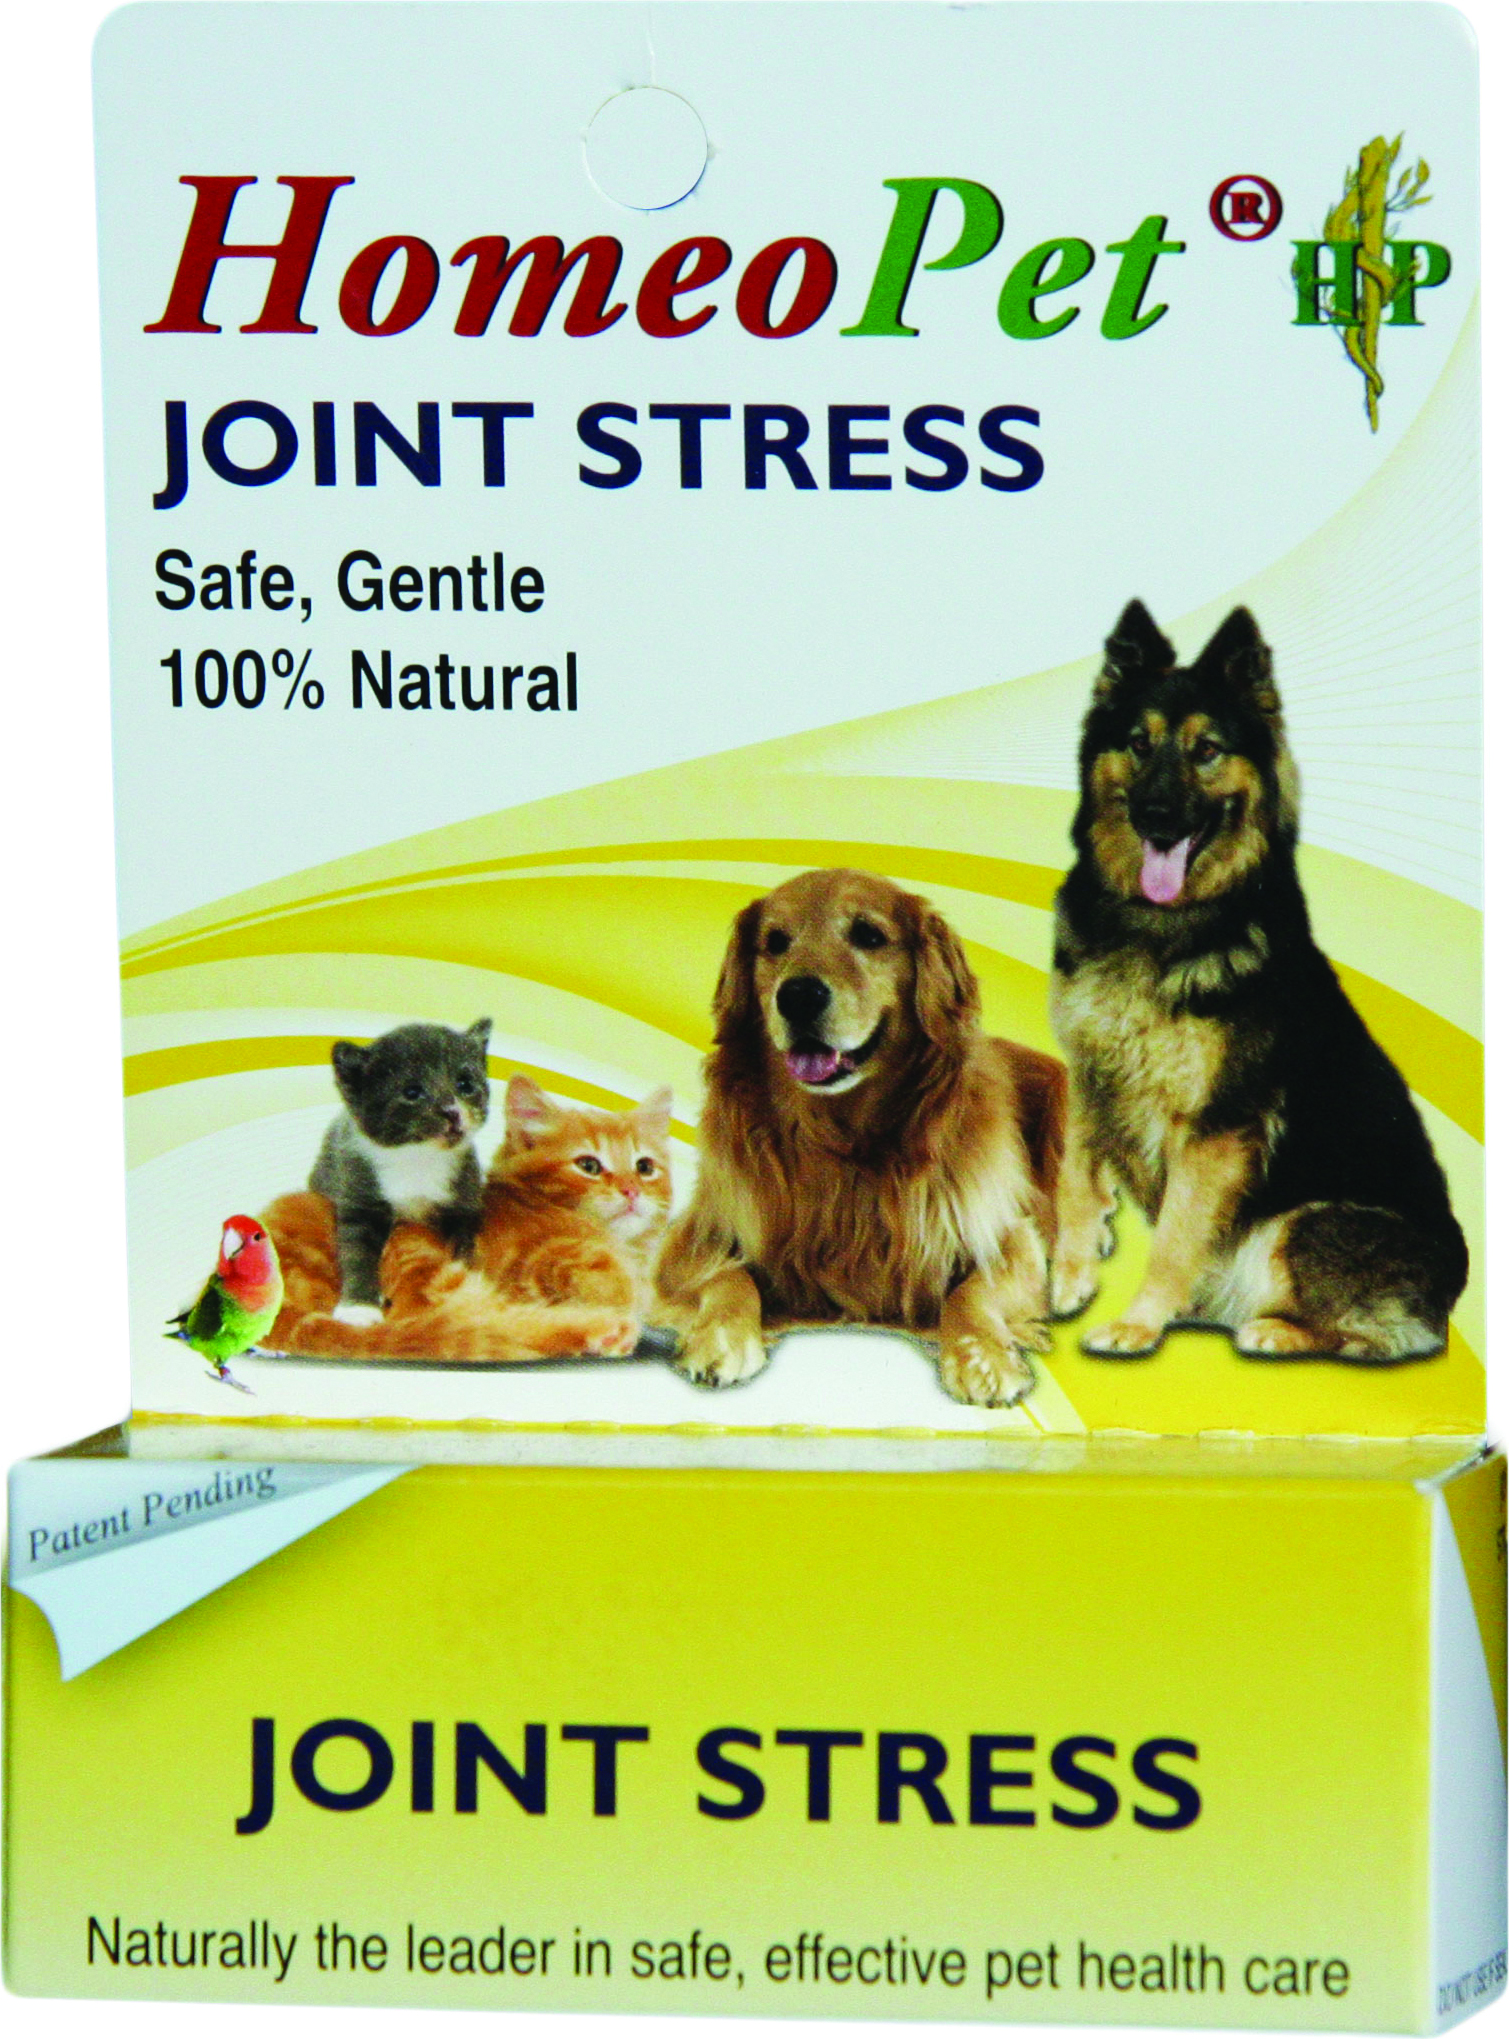 DOG HOMEOPET JOINT STRESS